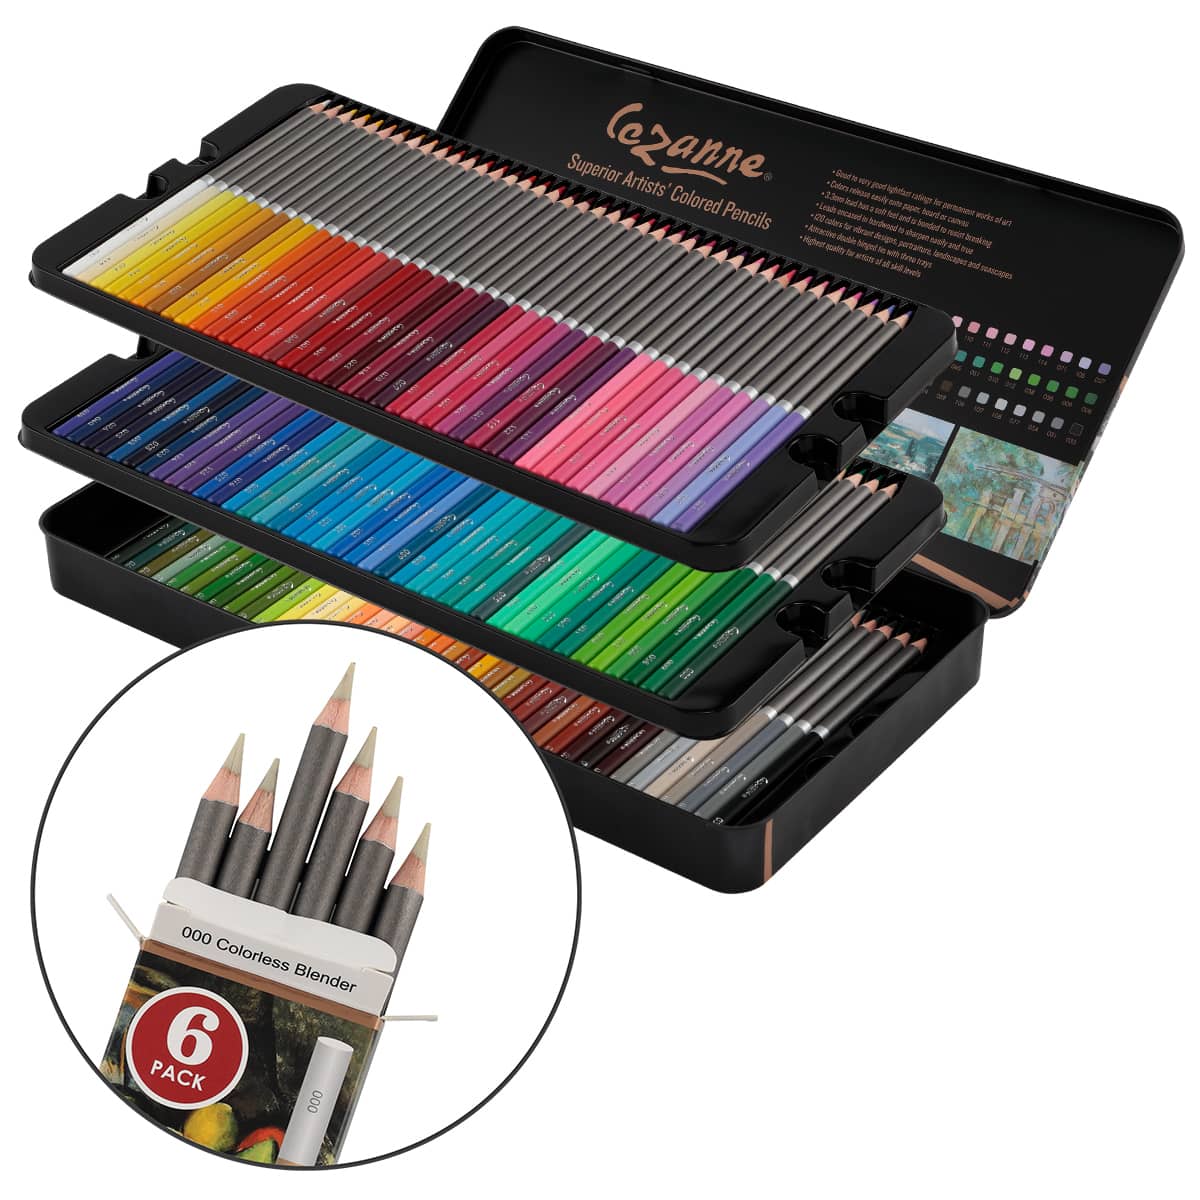 Cezanne Colored Pencil Set of 120 w/ 6 Colorless Blenders Set